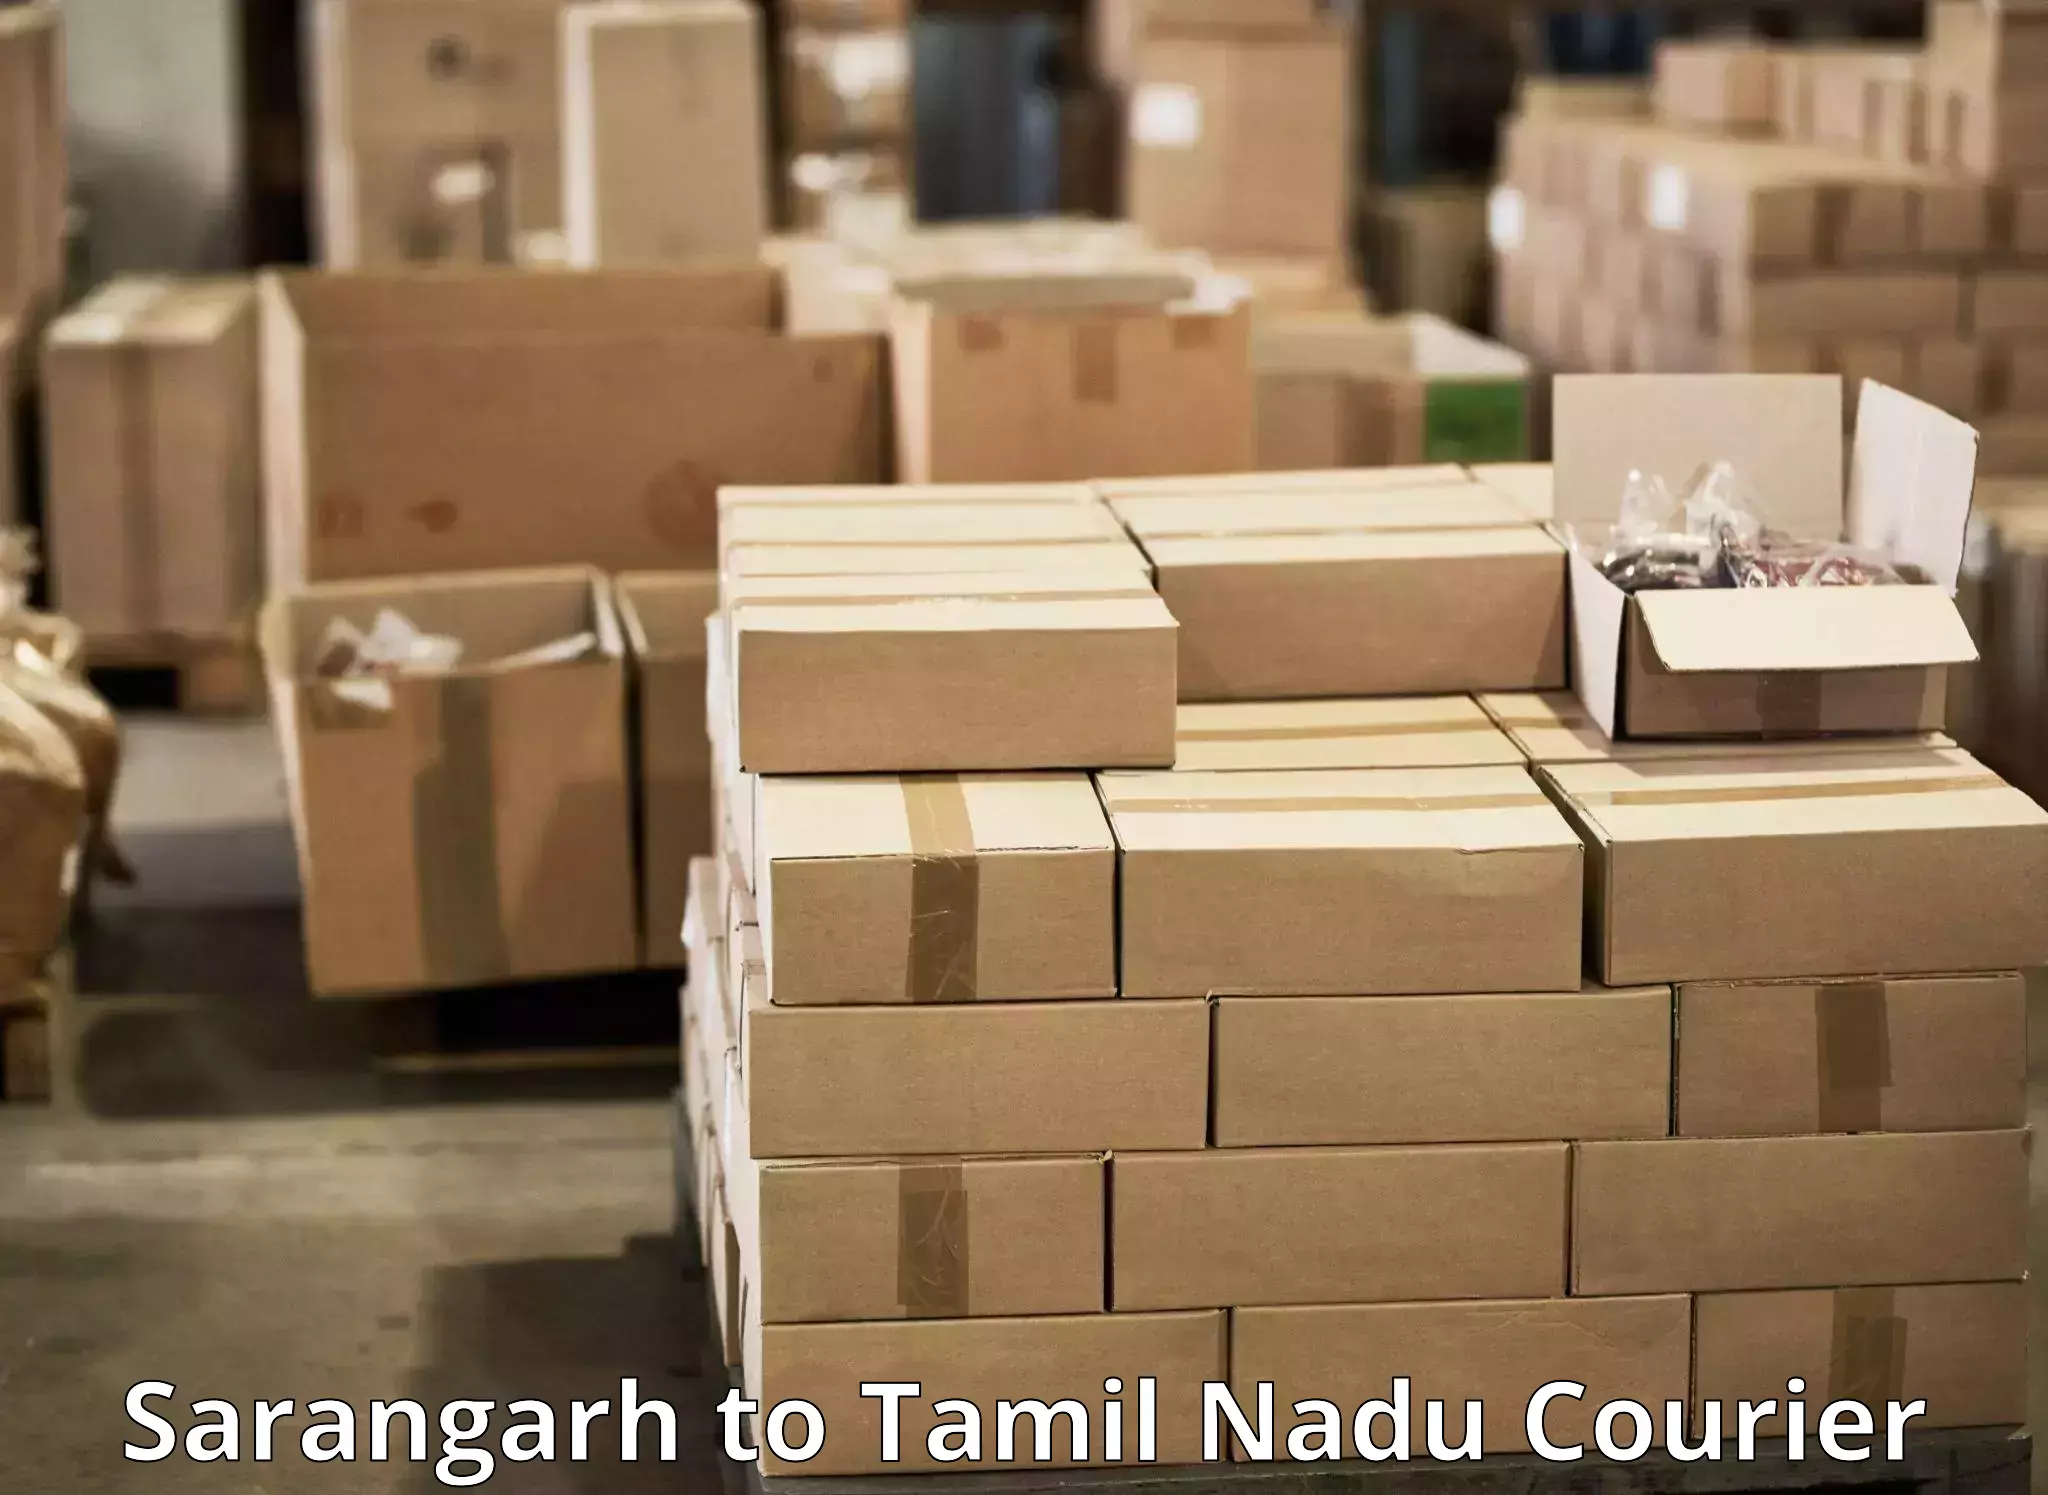 Bulk courier orders Sarangarh to Meenakshi Academy of Higher Education and Research Chennai